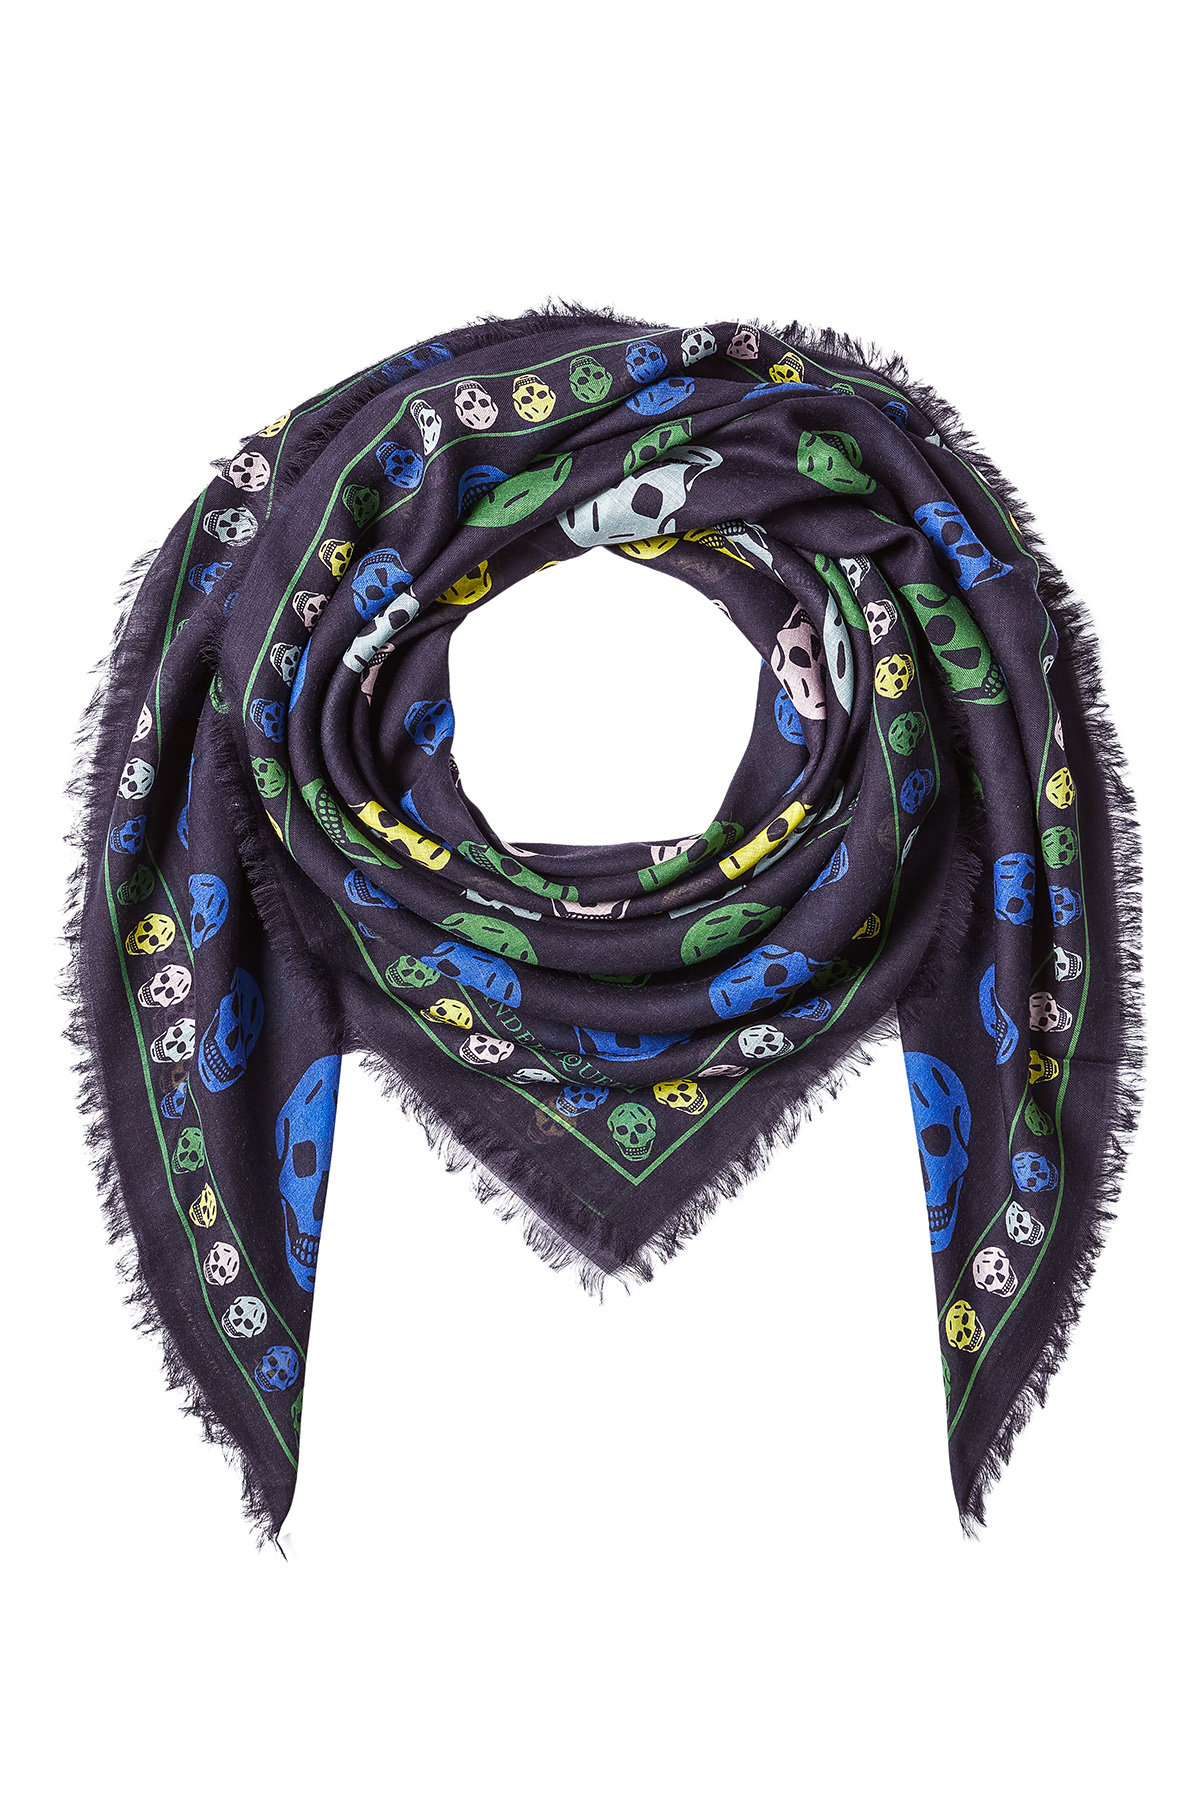 Alexander McQueen - Skull Printed Scarf with Wool